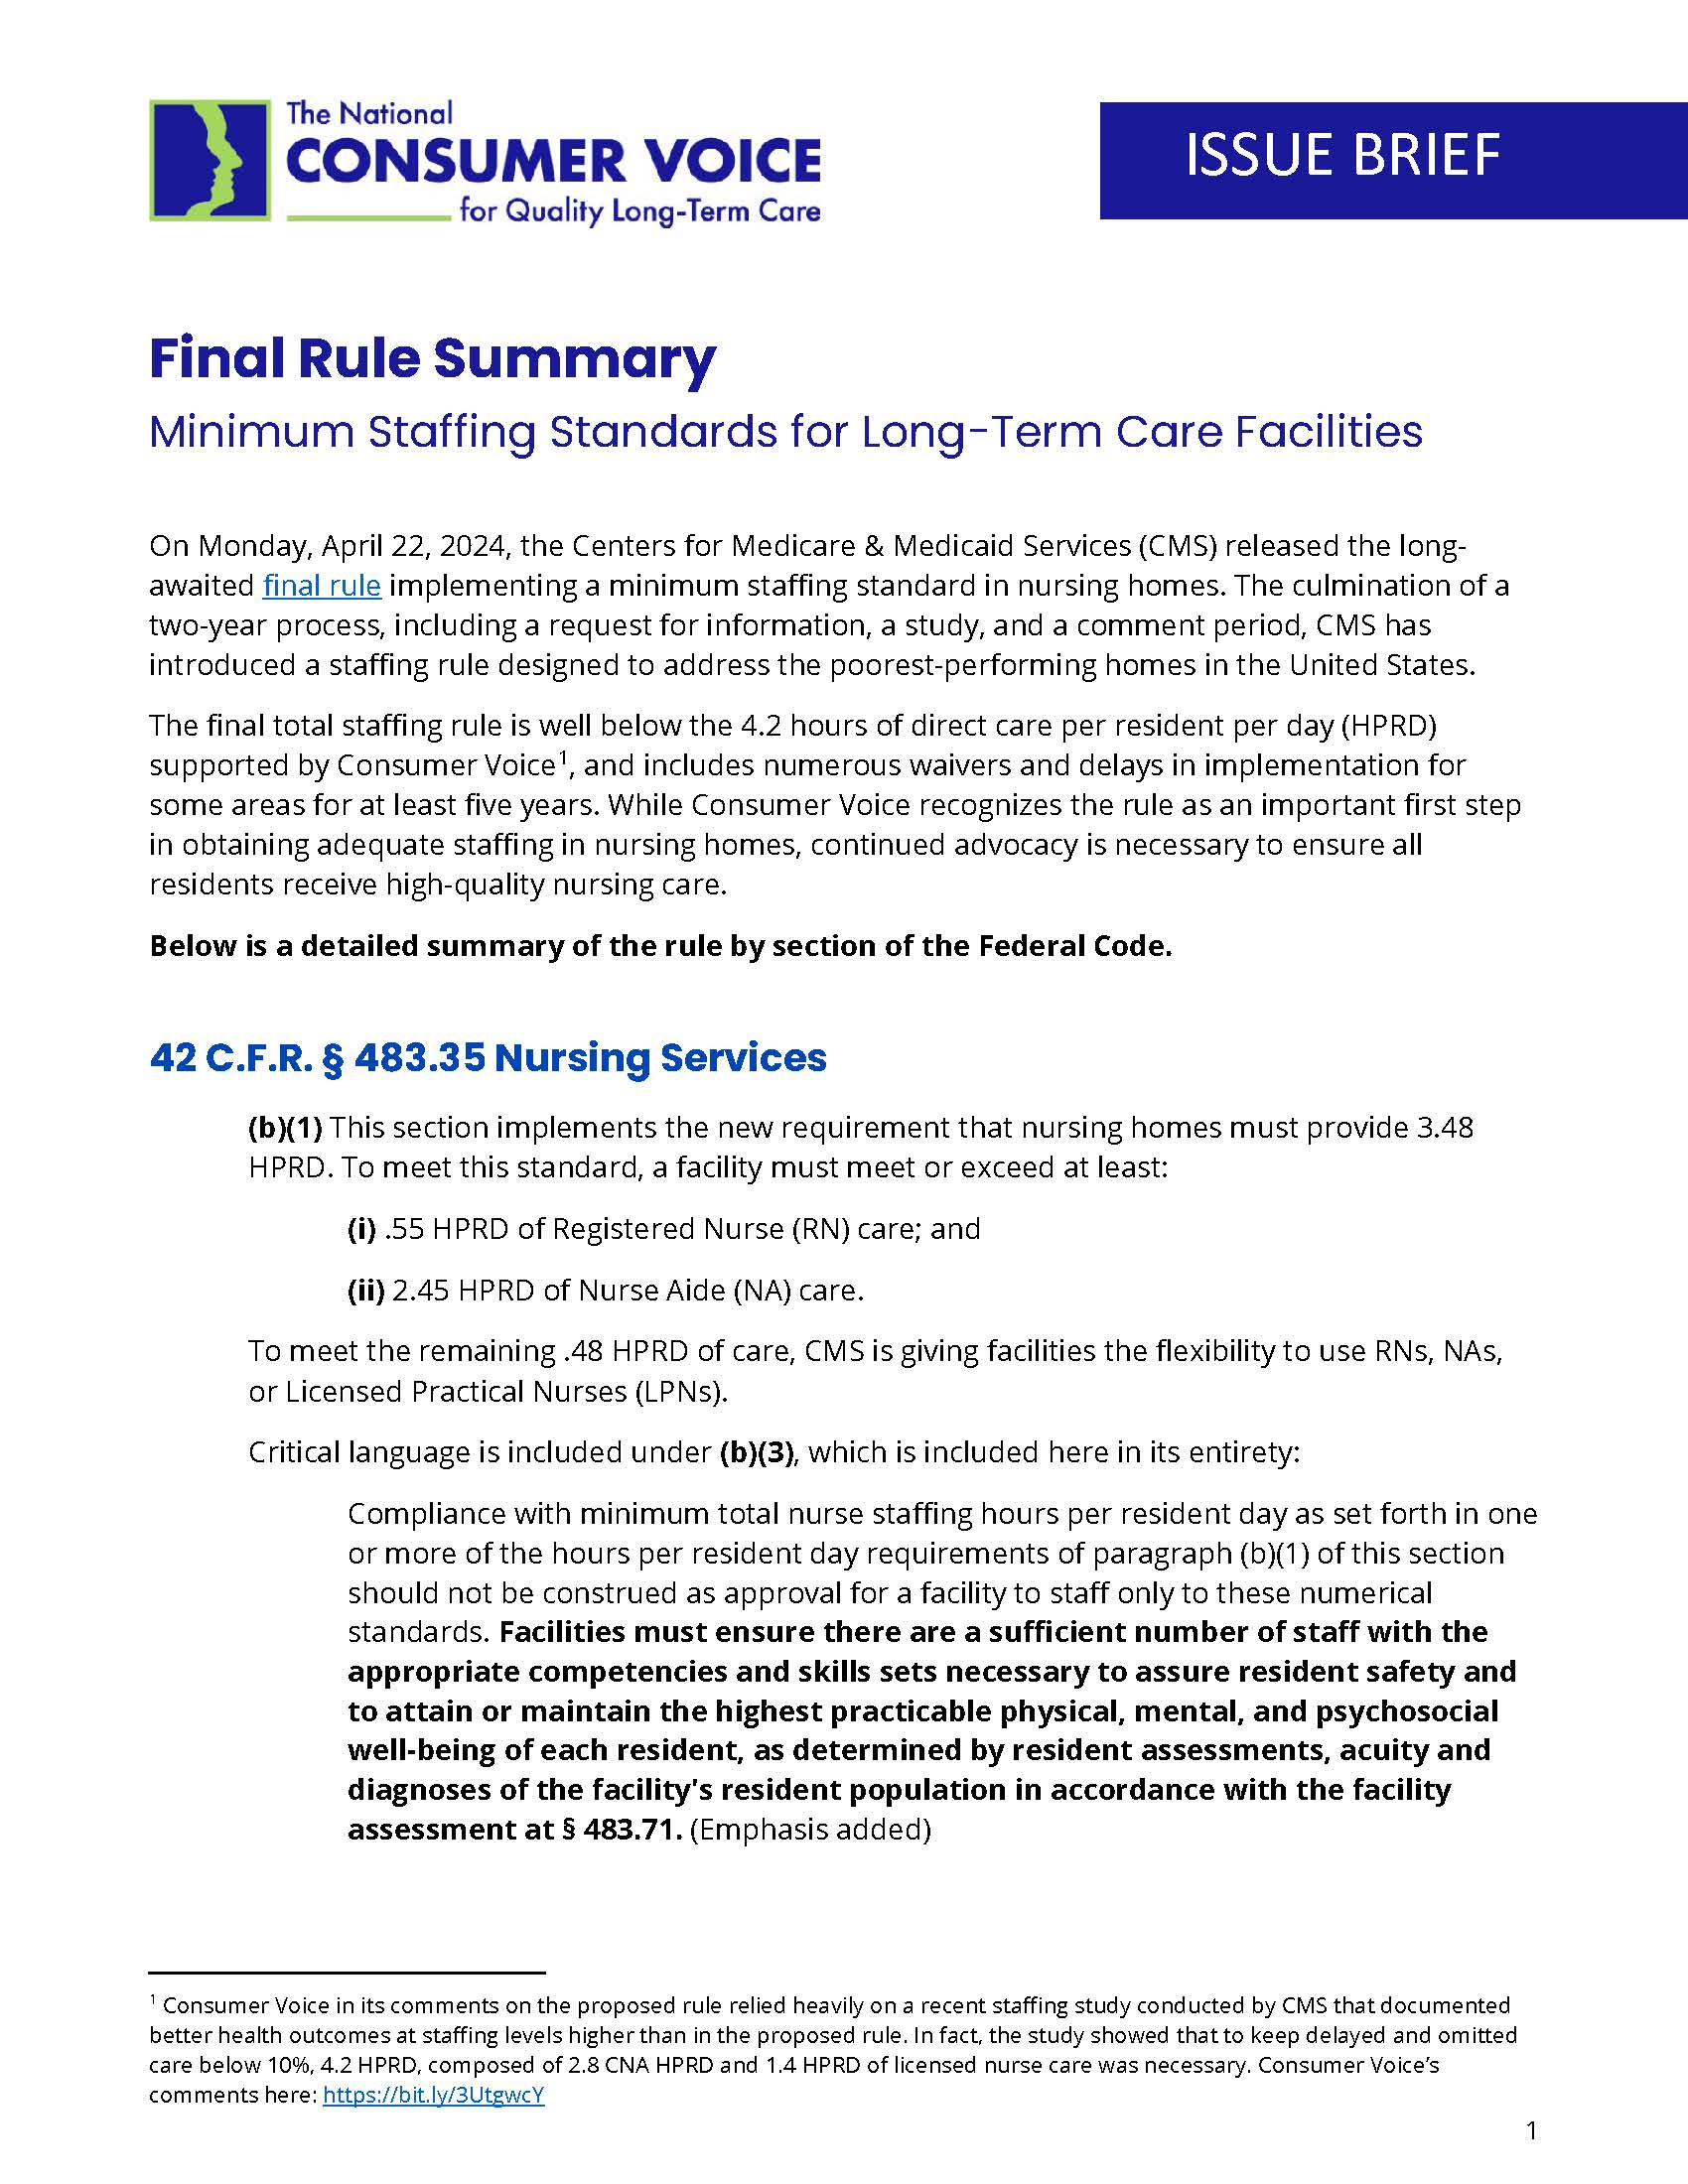 Staffing final rule summary